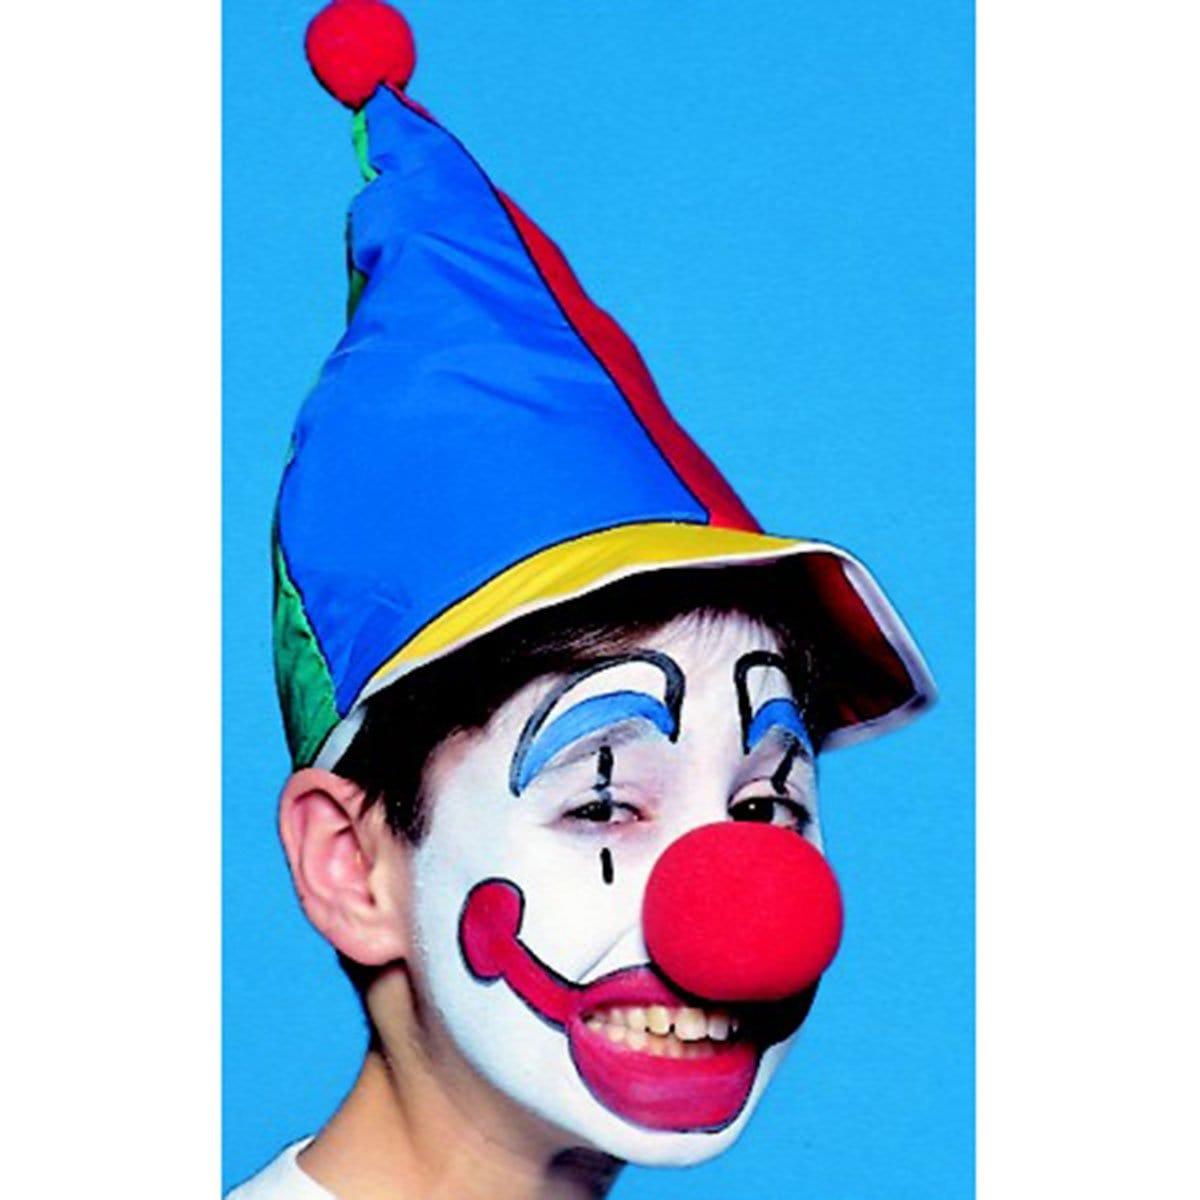 Buy Costume Accessories Foam Clown Nose sold at Party Expert